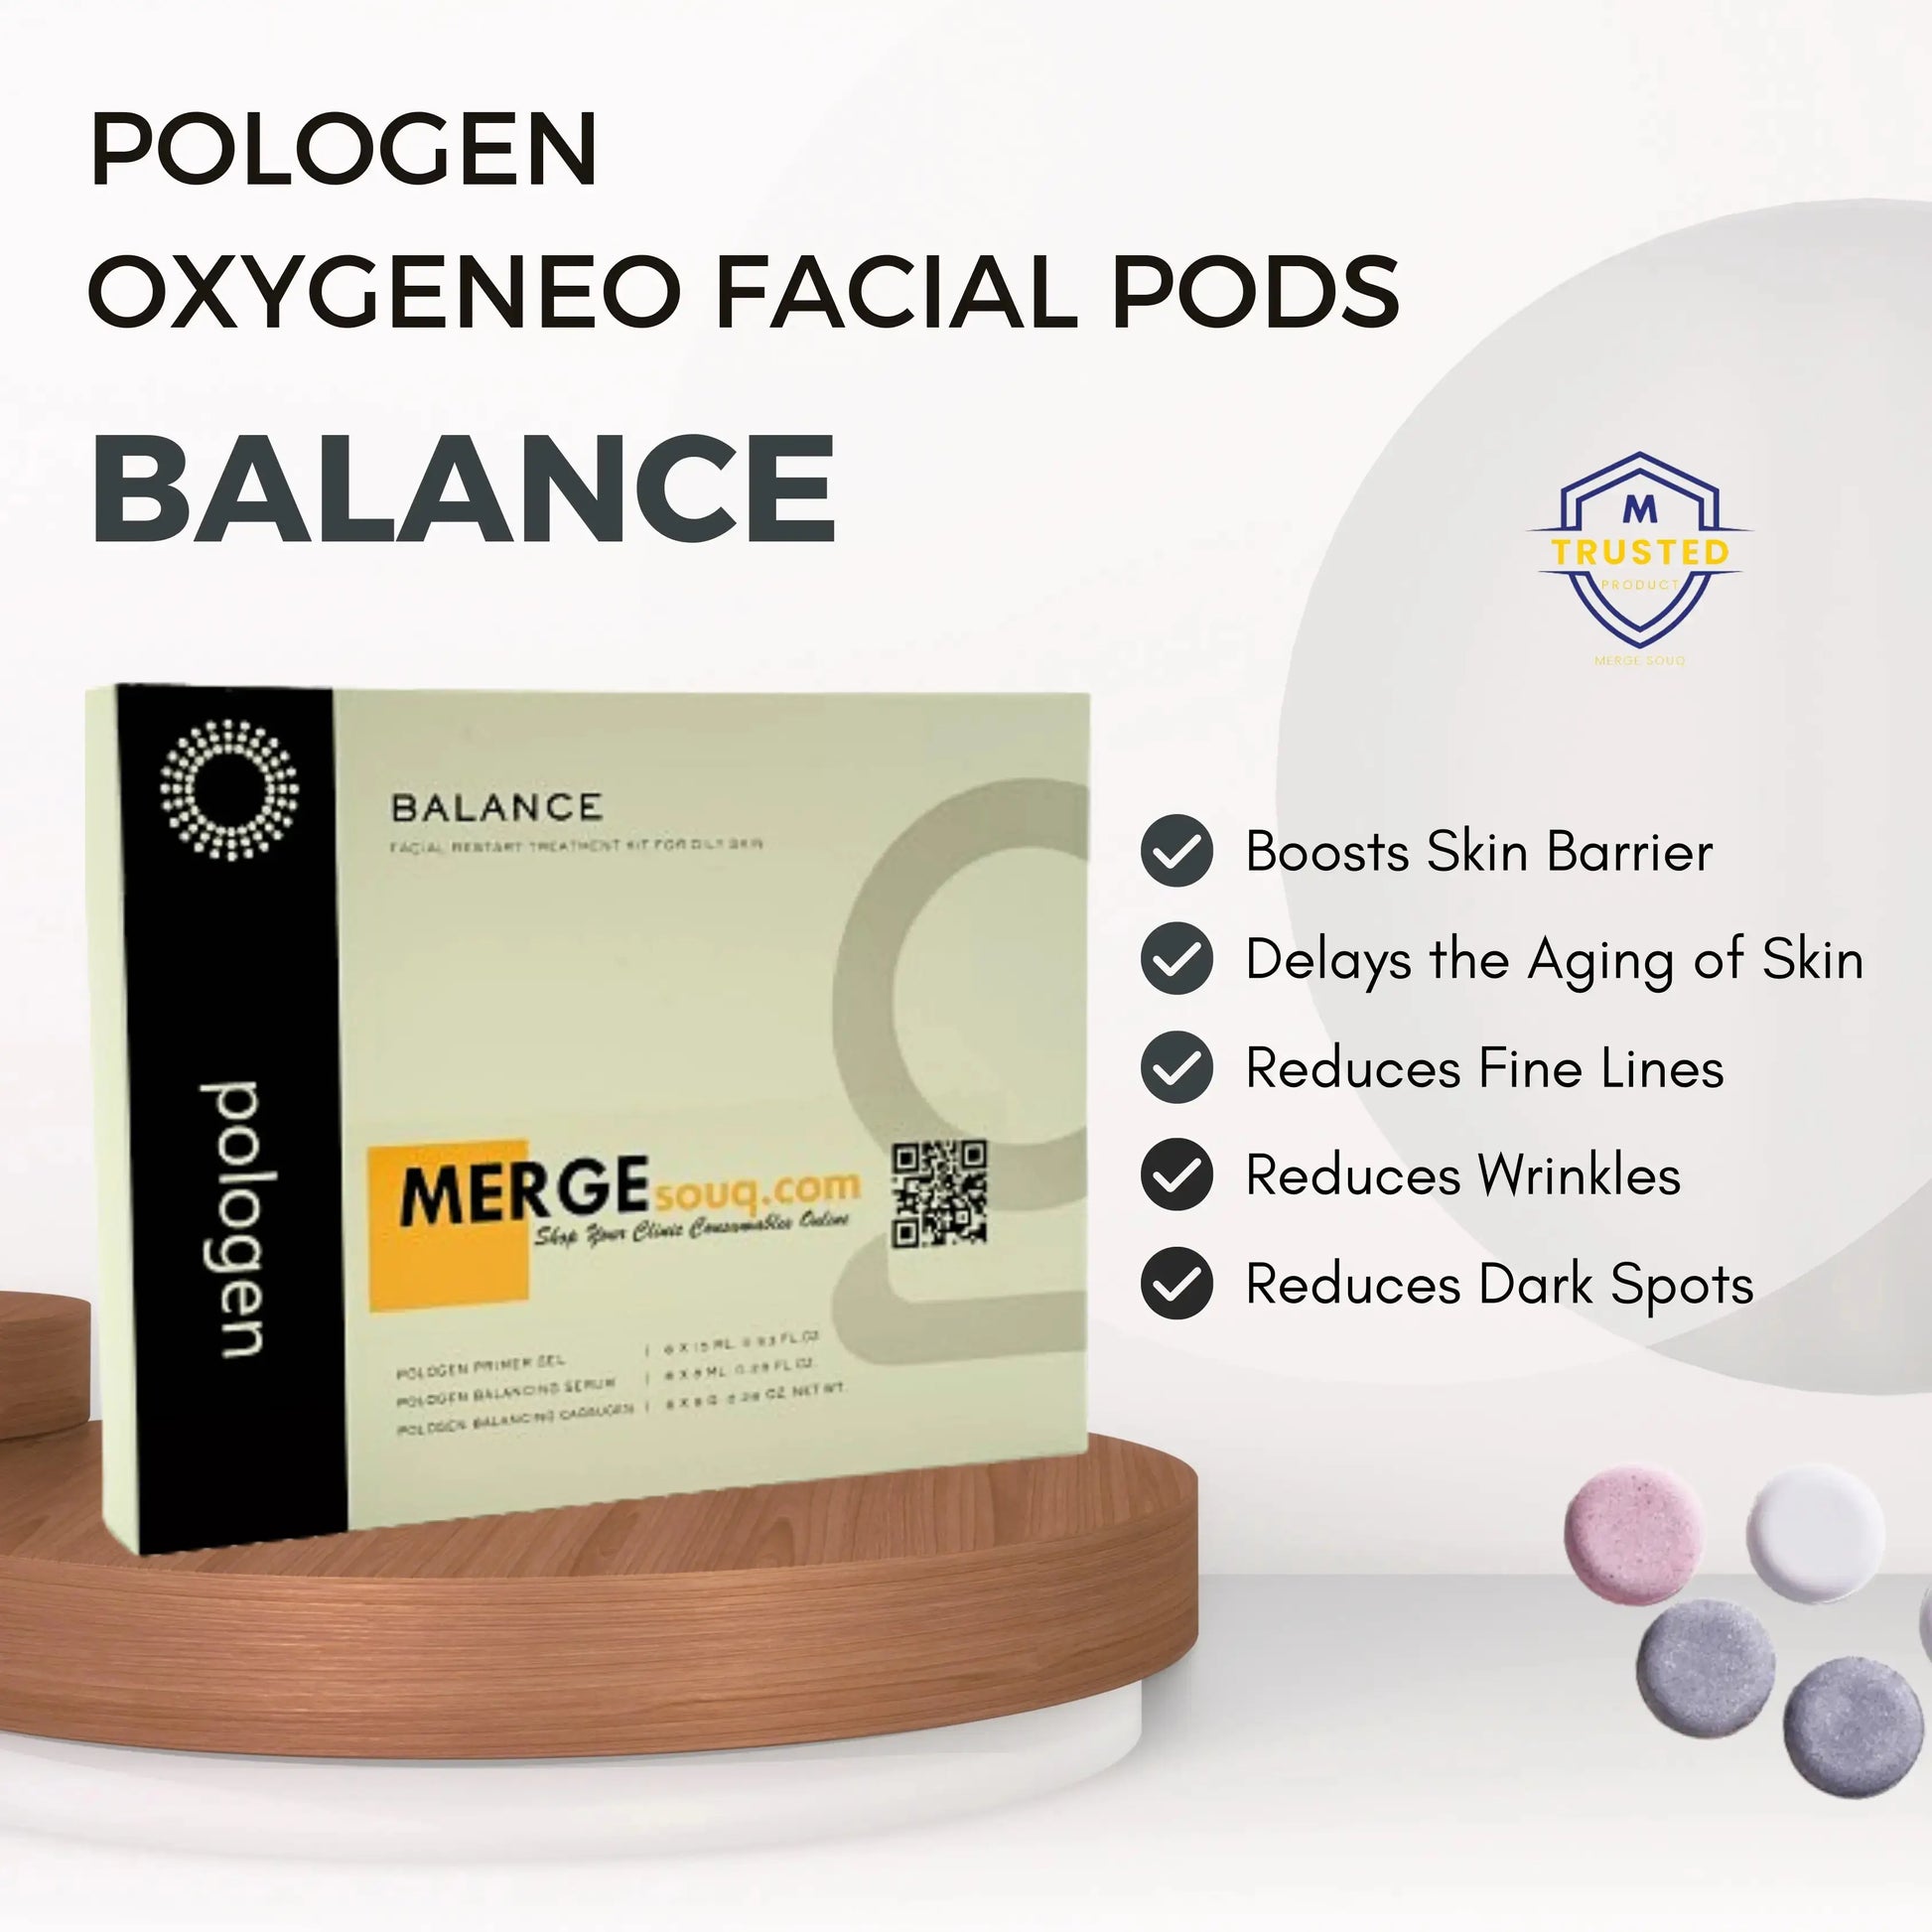 Pologen Geneo Balance| Oxygen Facial Pods| Facial Restart Treatment Kit for Oily Skin| Protects Skin